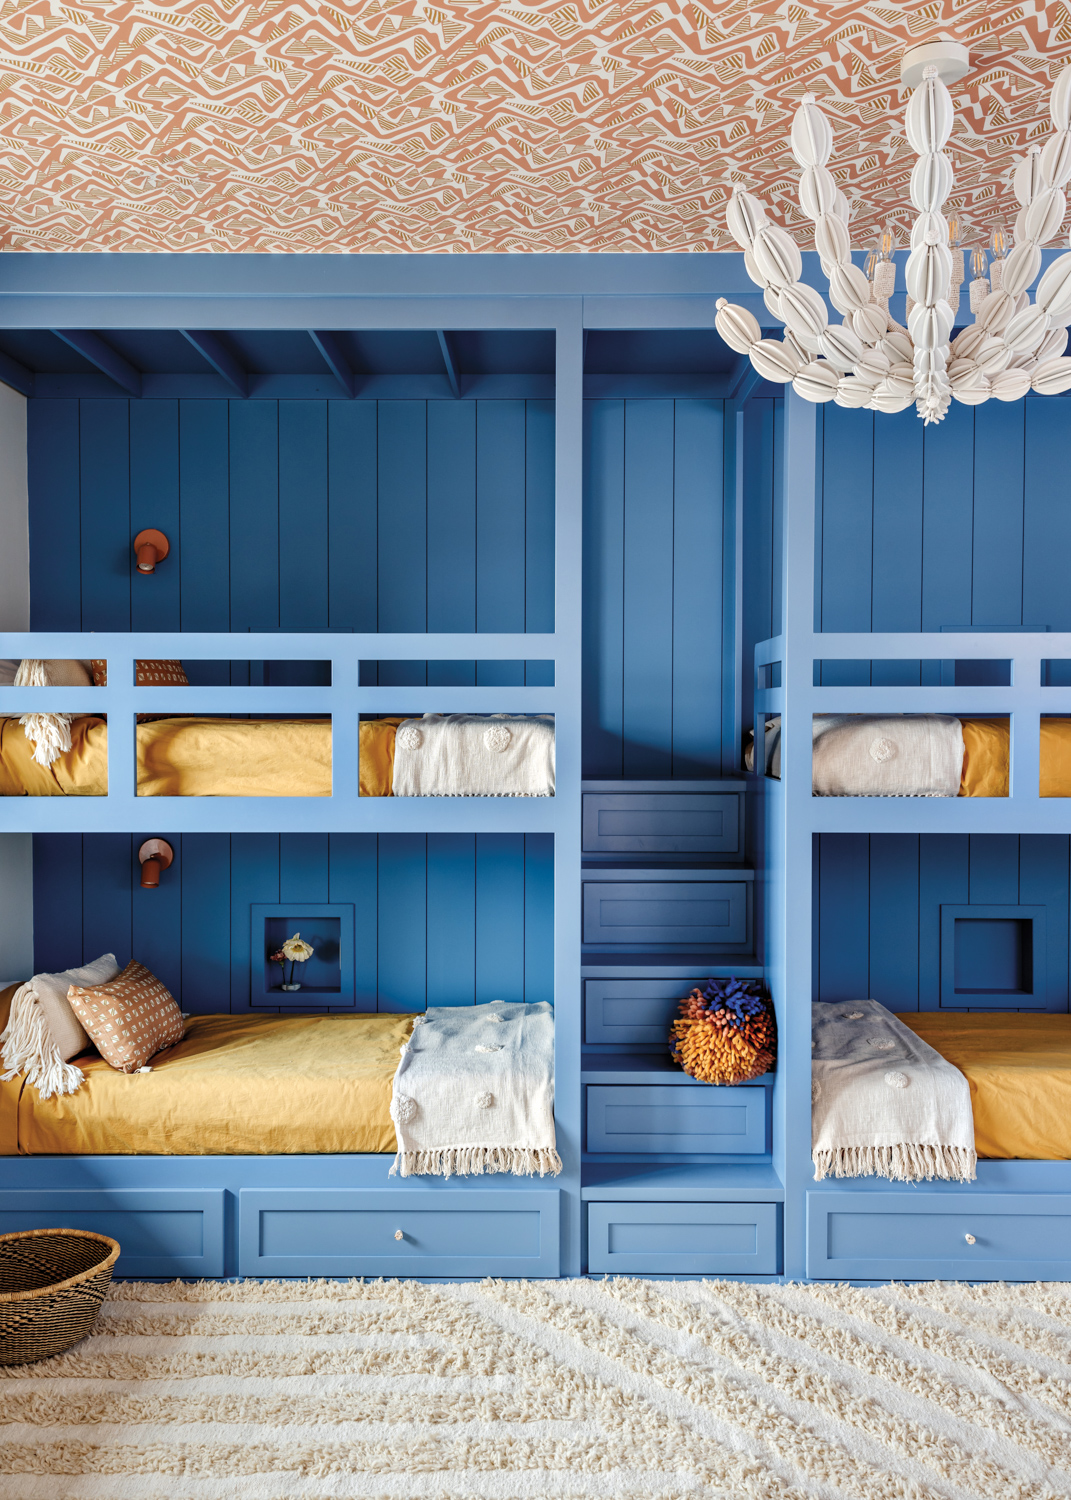 Four-bed bunk room with blue-painted...